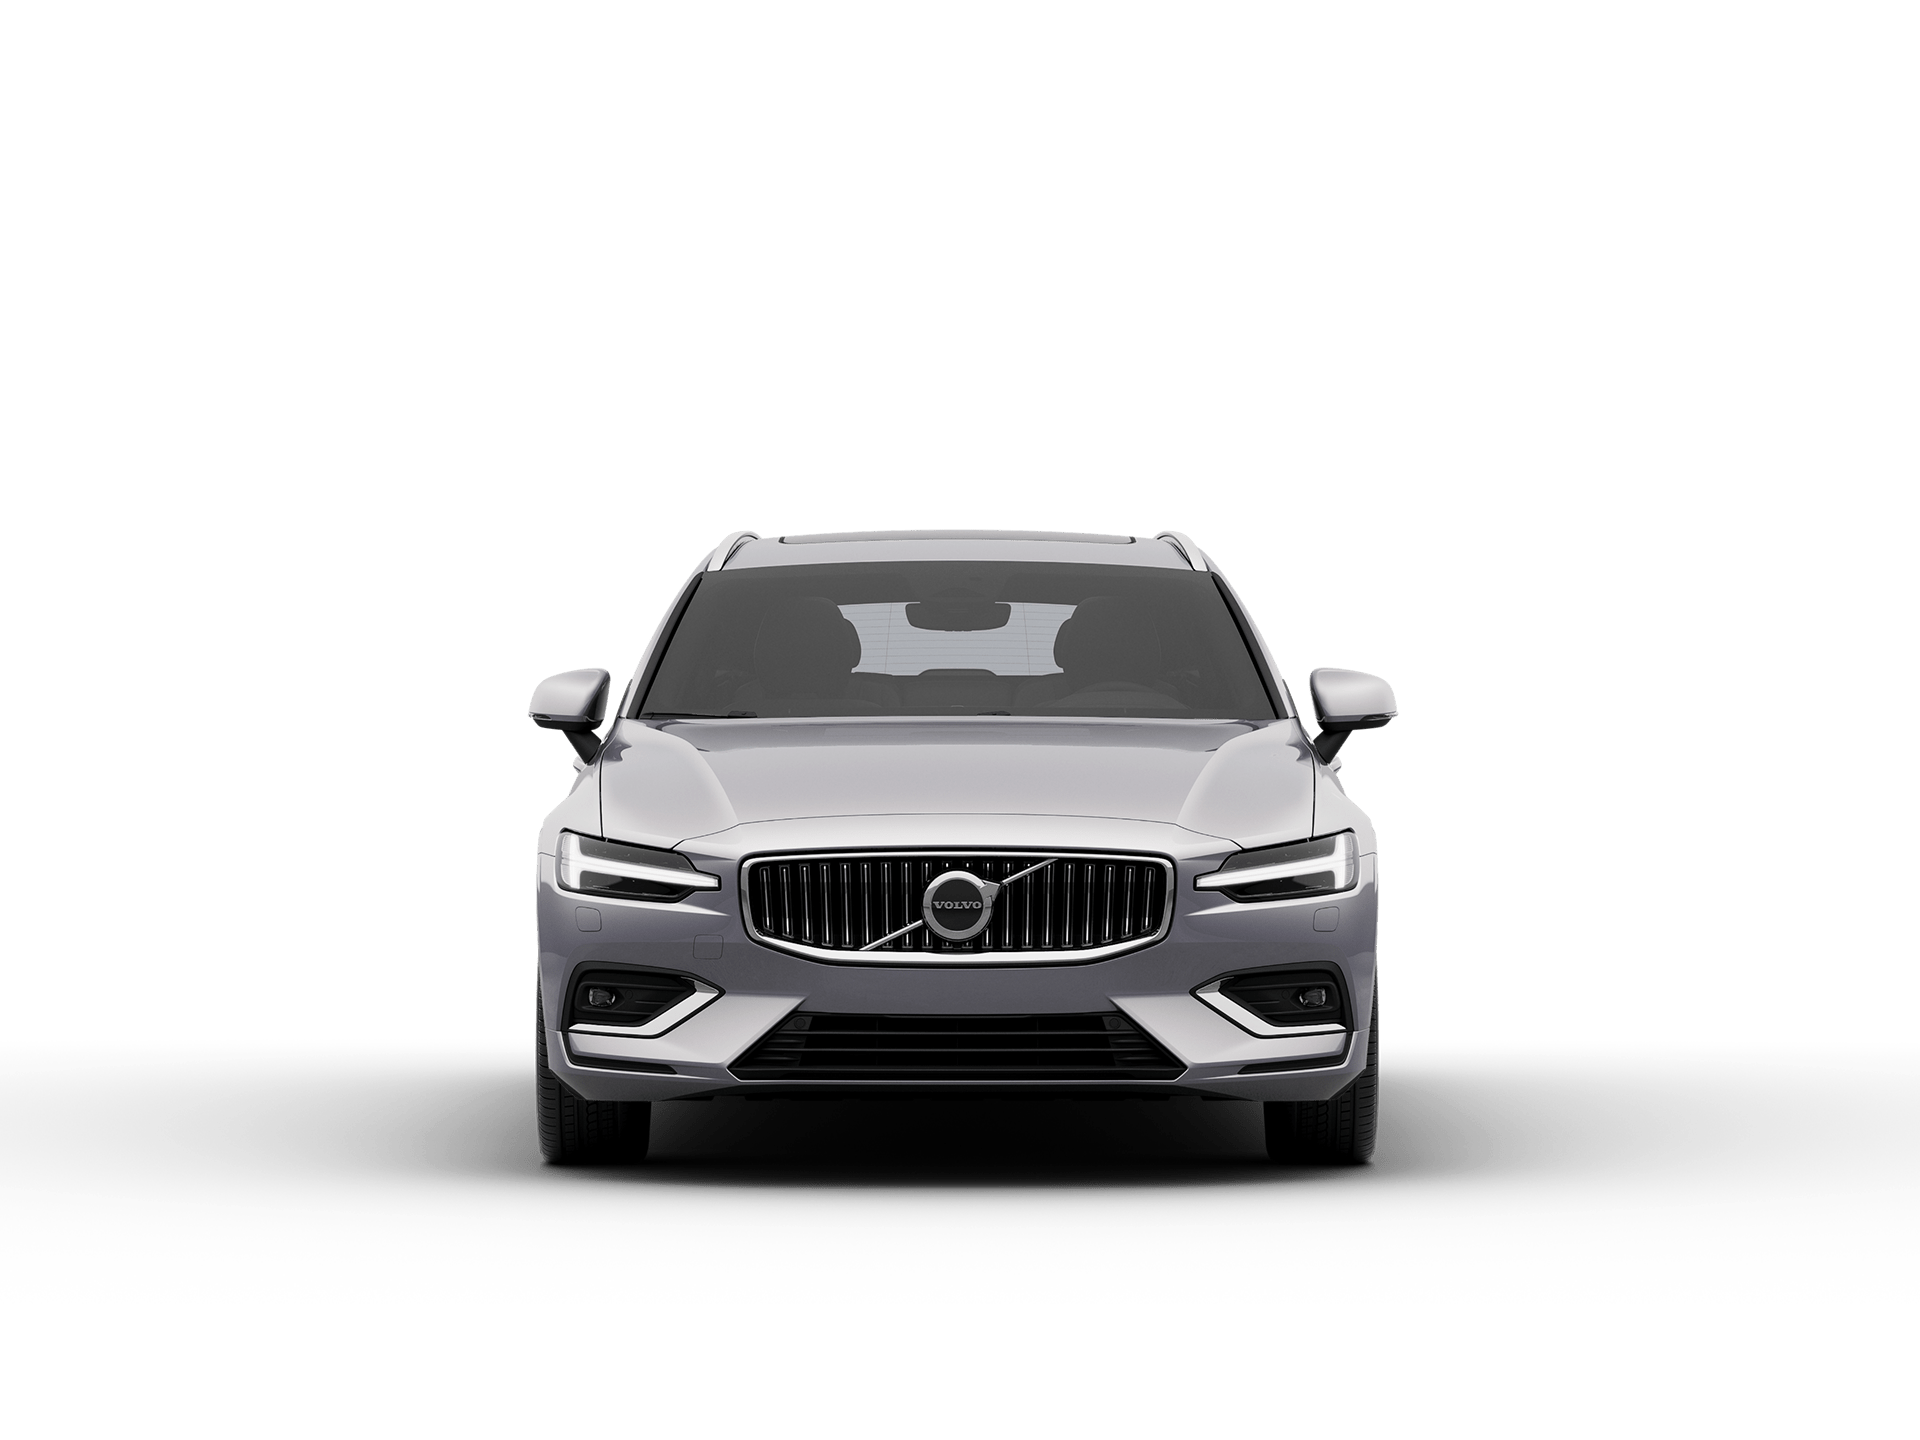 The front of a Volvo V60.